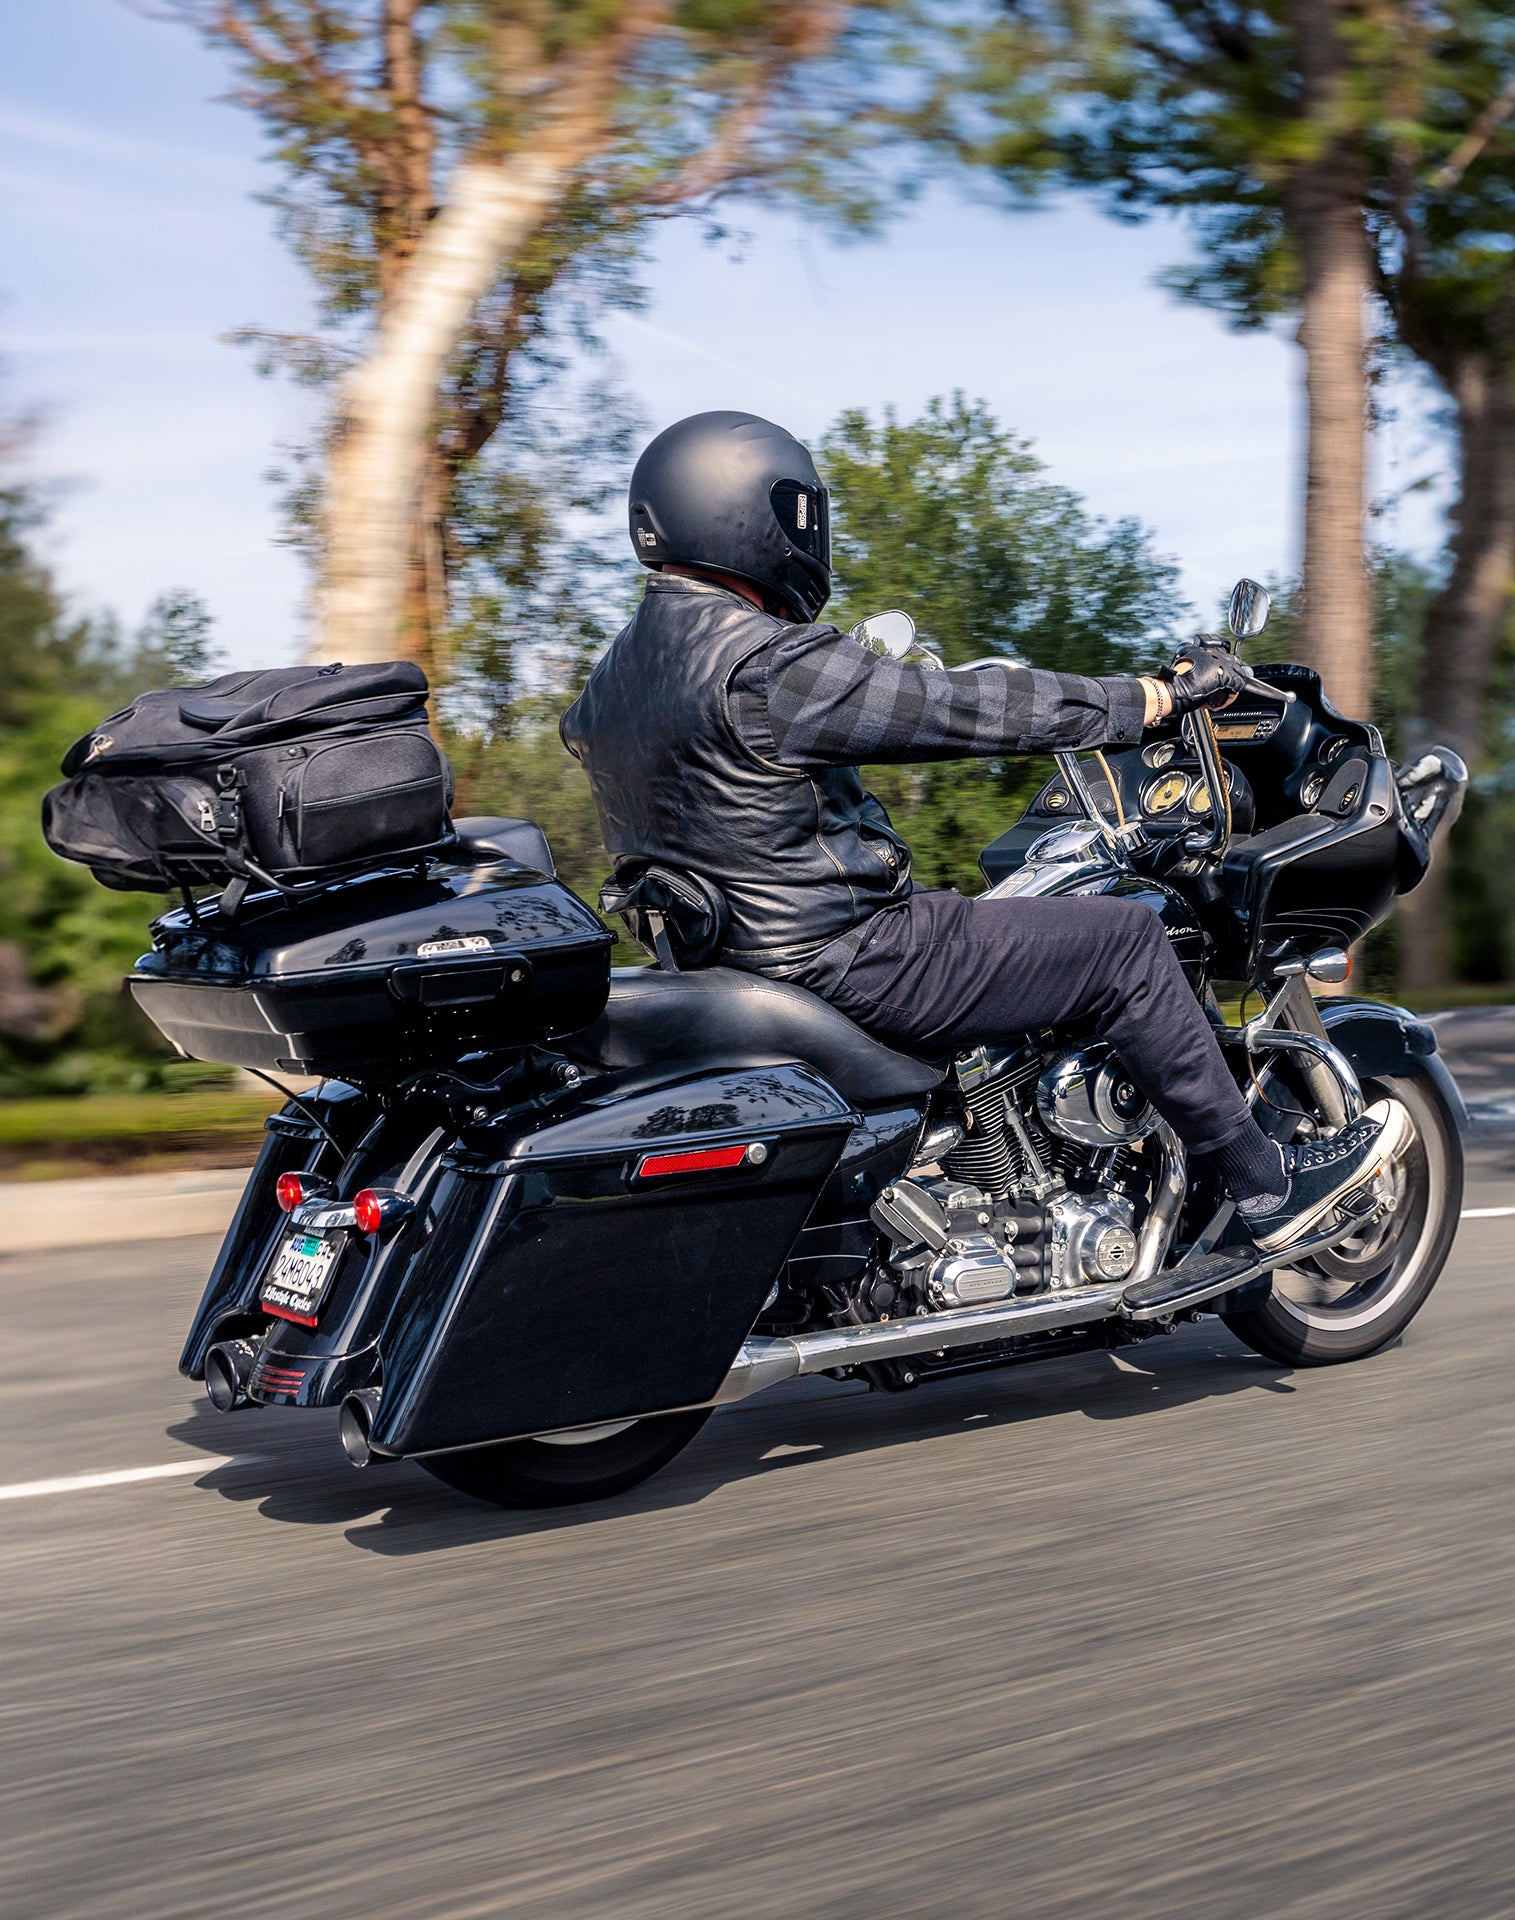 58L - Stretched Bagger 4.5" Extra Large Painted Motorcycle Hard Saddlebags For Harley Road Glide FLTR (2009-2013)